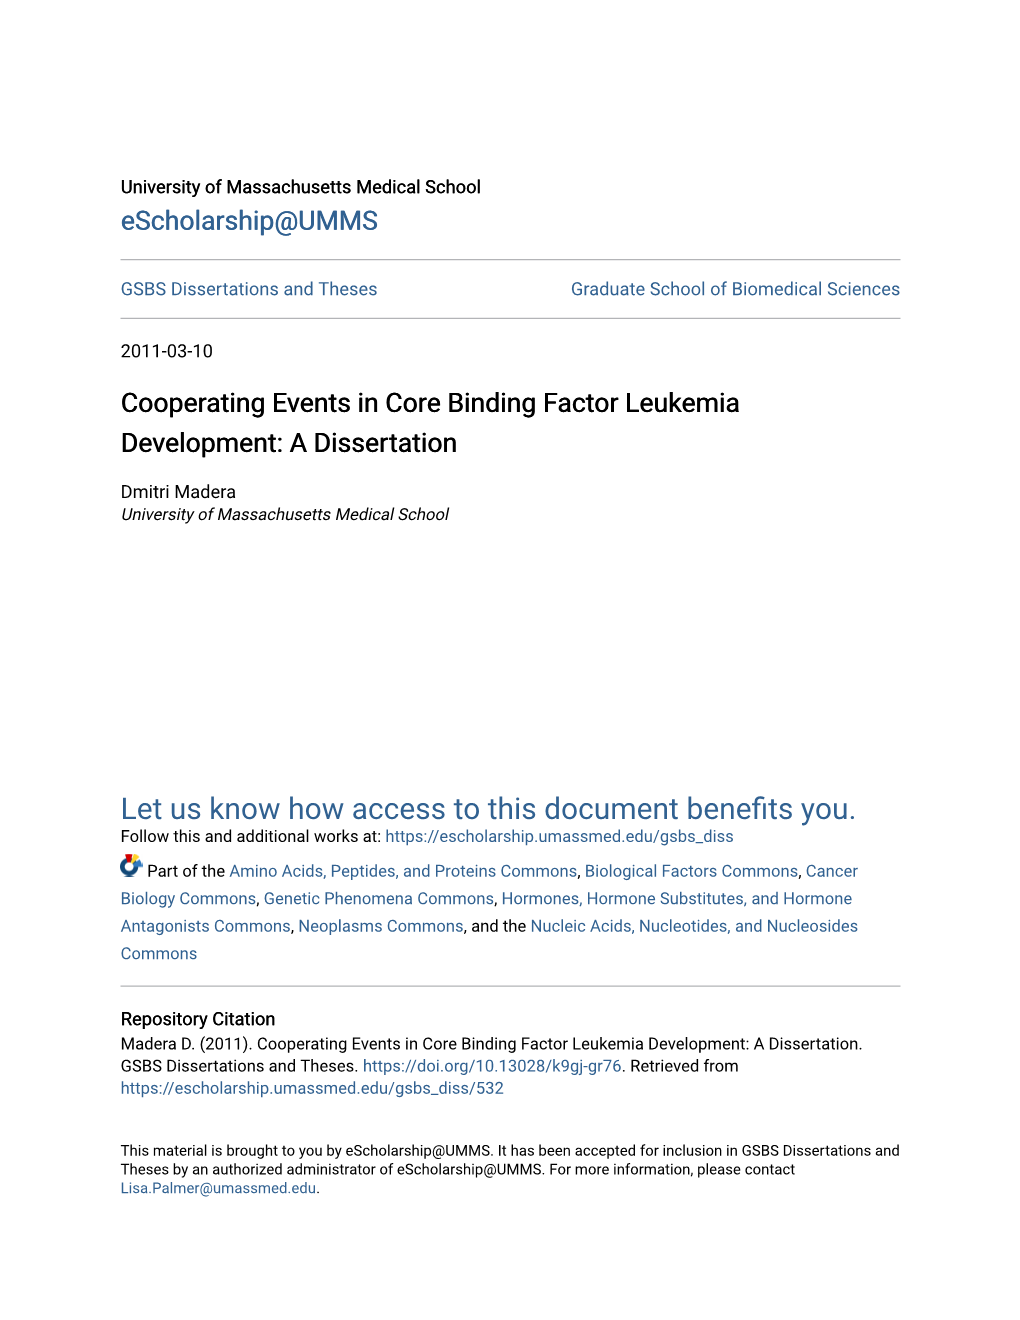 Cooperating Events in Core Binding Factor Leukemia Development: a Dissertation